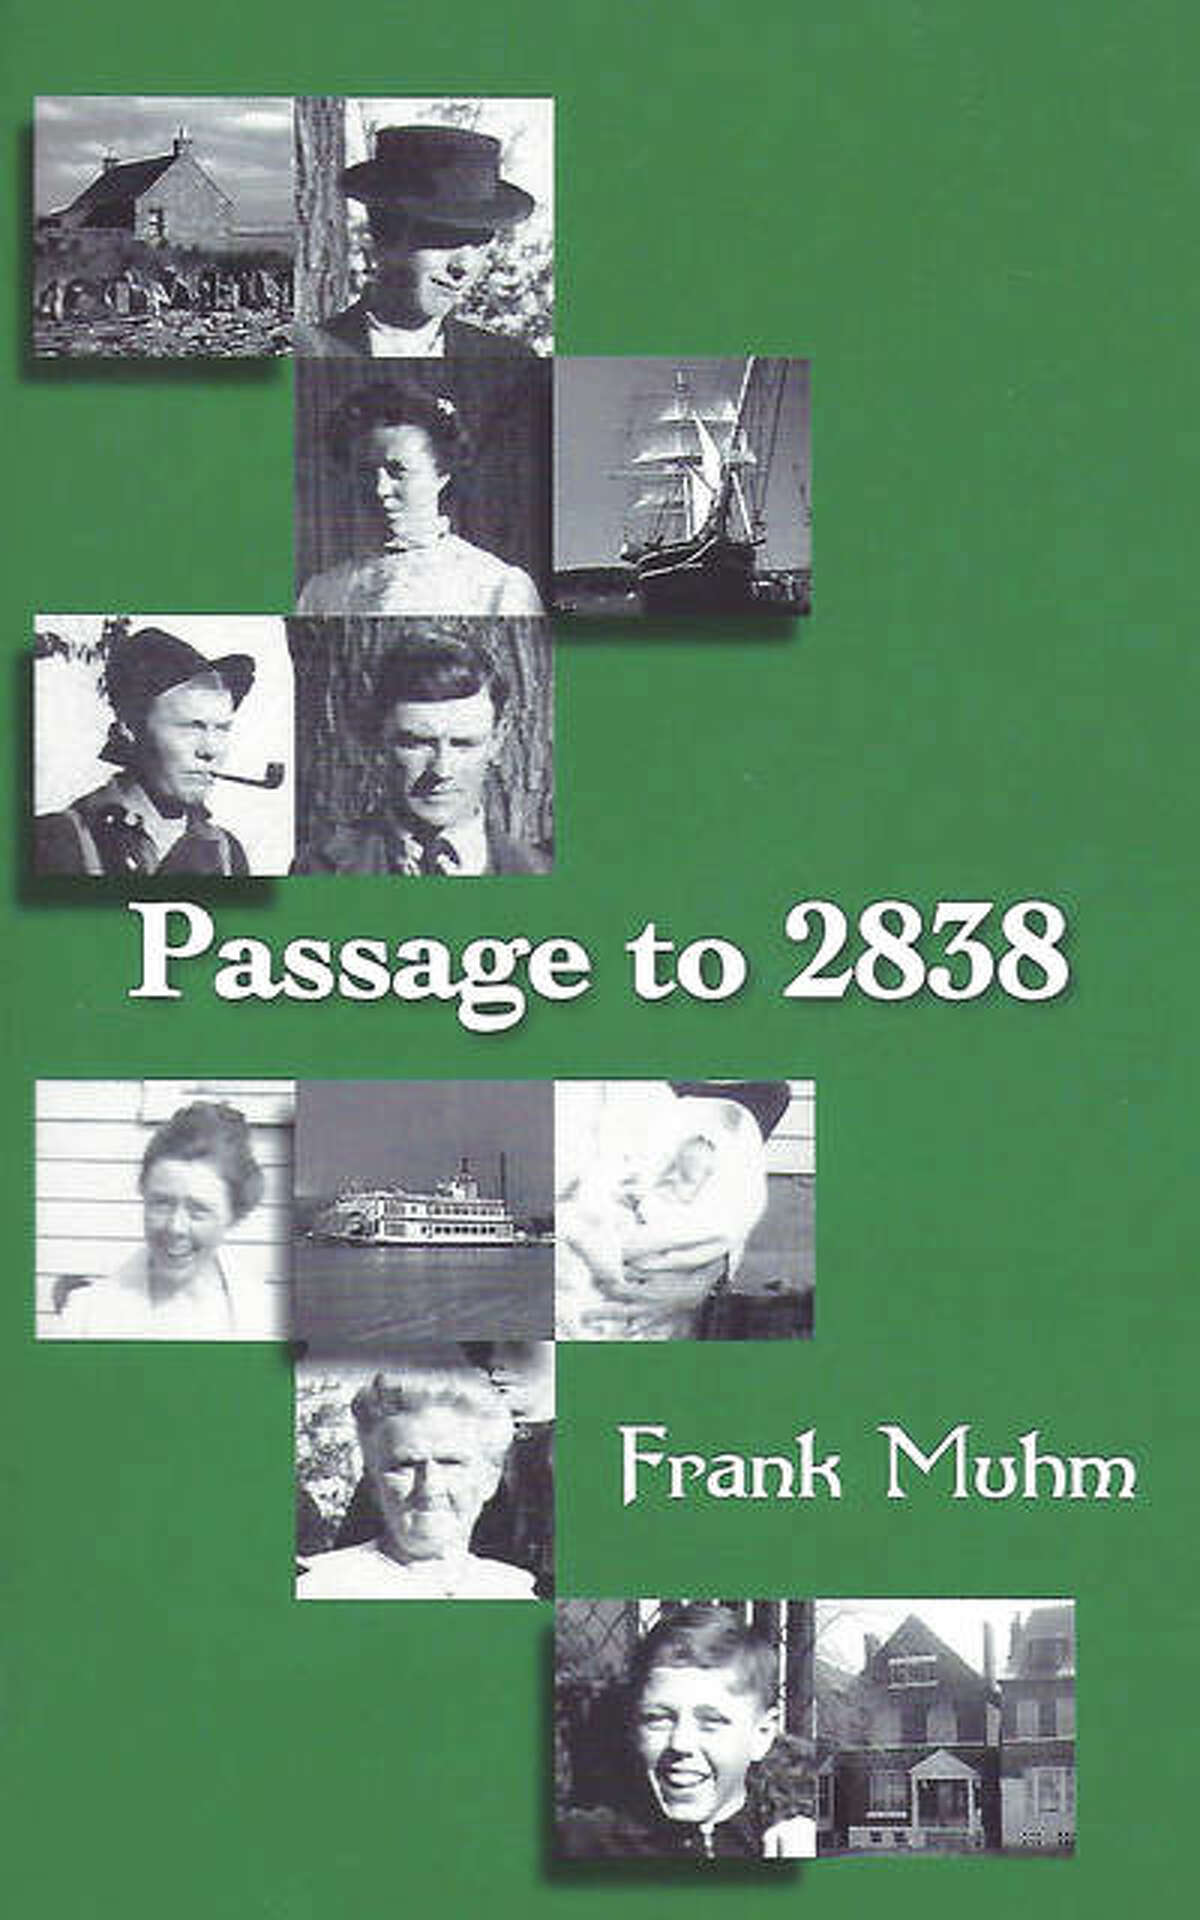 “Passage to 2838,” by Frank Muhm, can be purchased in Alton at Been There, a resale, gift and refurbishing shop, at 13 E. Broadway; and, in St. Louis, at Dunaway Books, 3111 S. Grand Blvd., The Kerry Cottage Ltd., 2119 S. Big Bend Blvd., and, Catholic Supply of St. Louis Inc., 6759 Chippewa St., or send Muhm an email at frankmuhm@att.net.